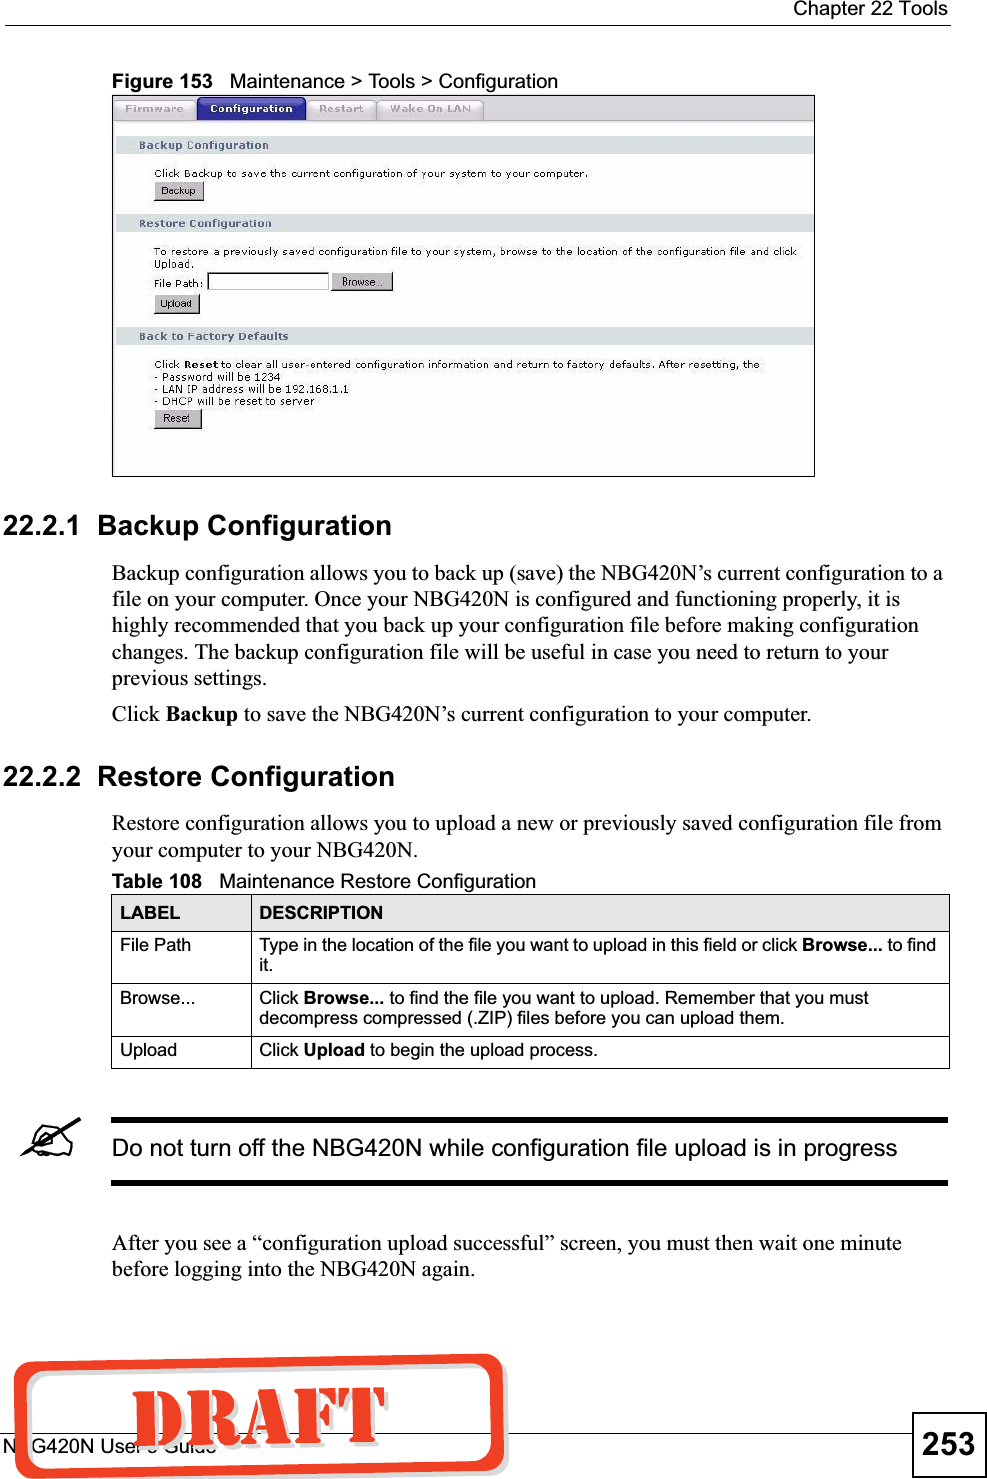  Chapter 22 ToolsNBG420N User’s Guide 253Figure 153   Maintenance &gt; Tools &gt; Configuration 22.2.1  Backup ConfigurationBackup configuration allows you to back up (save) the NBG420N’s current configuration to a file on your computer. Once your NBG420N is configured and functioning properly, it is highly recommended that you back up your configuration file before making configuration changes. The backup configuration file will be useful in case you need to return to your previous settings. Click Backup to save the NBG420N’s current configuration to your computer.22.2.2  Restore ConfigurationRestore configuration allows you to upload a new or previously saved configuration file from your computer to your NBG420N.&quot;Do not turn off the NBG420N while configuration file upload is in progressAfter you see a “configuration upload successful” screen, you must then wait one minute before logging into the NBG420N again. Table 108   Maintenance Restore ConfigurationLABEL DESCRIPTIONFile Path  Type in the location of the file you want to upload in this field or click Browse... to find it.Browse...  Click Browse... to find the file you want to upload. Remember that you must decompress compressed (.ZIP) files before you can upload them. Upload  Click Upload to begin the upload process.